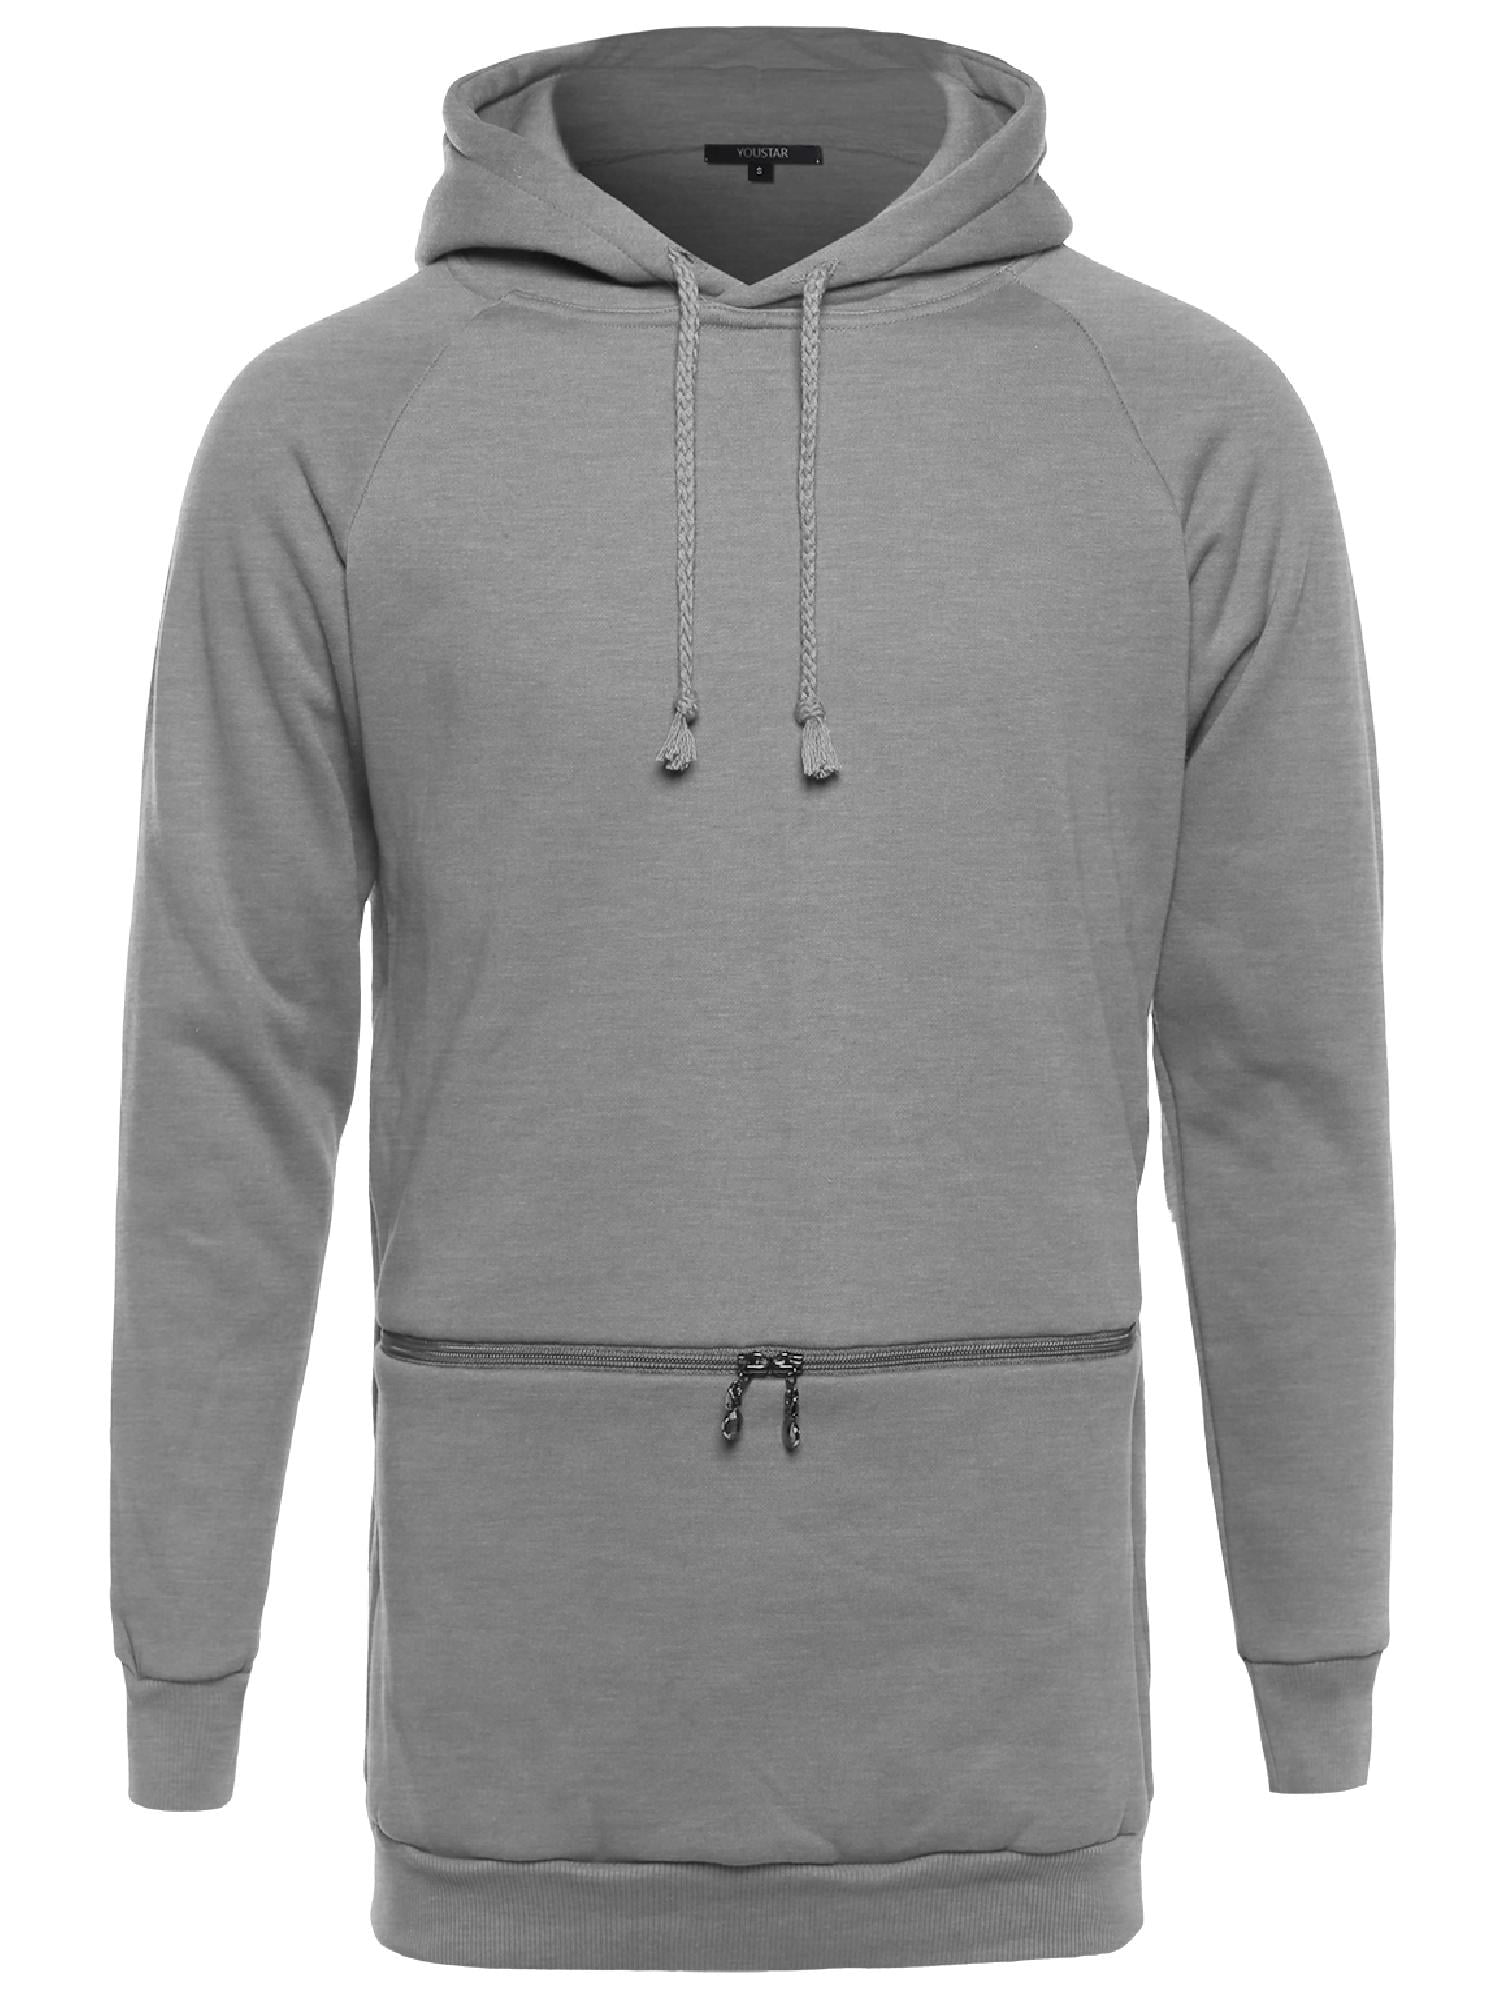 FashionOutfit Men's Basic Hoodie with 